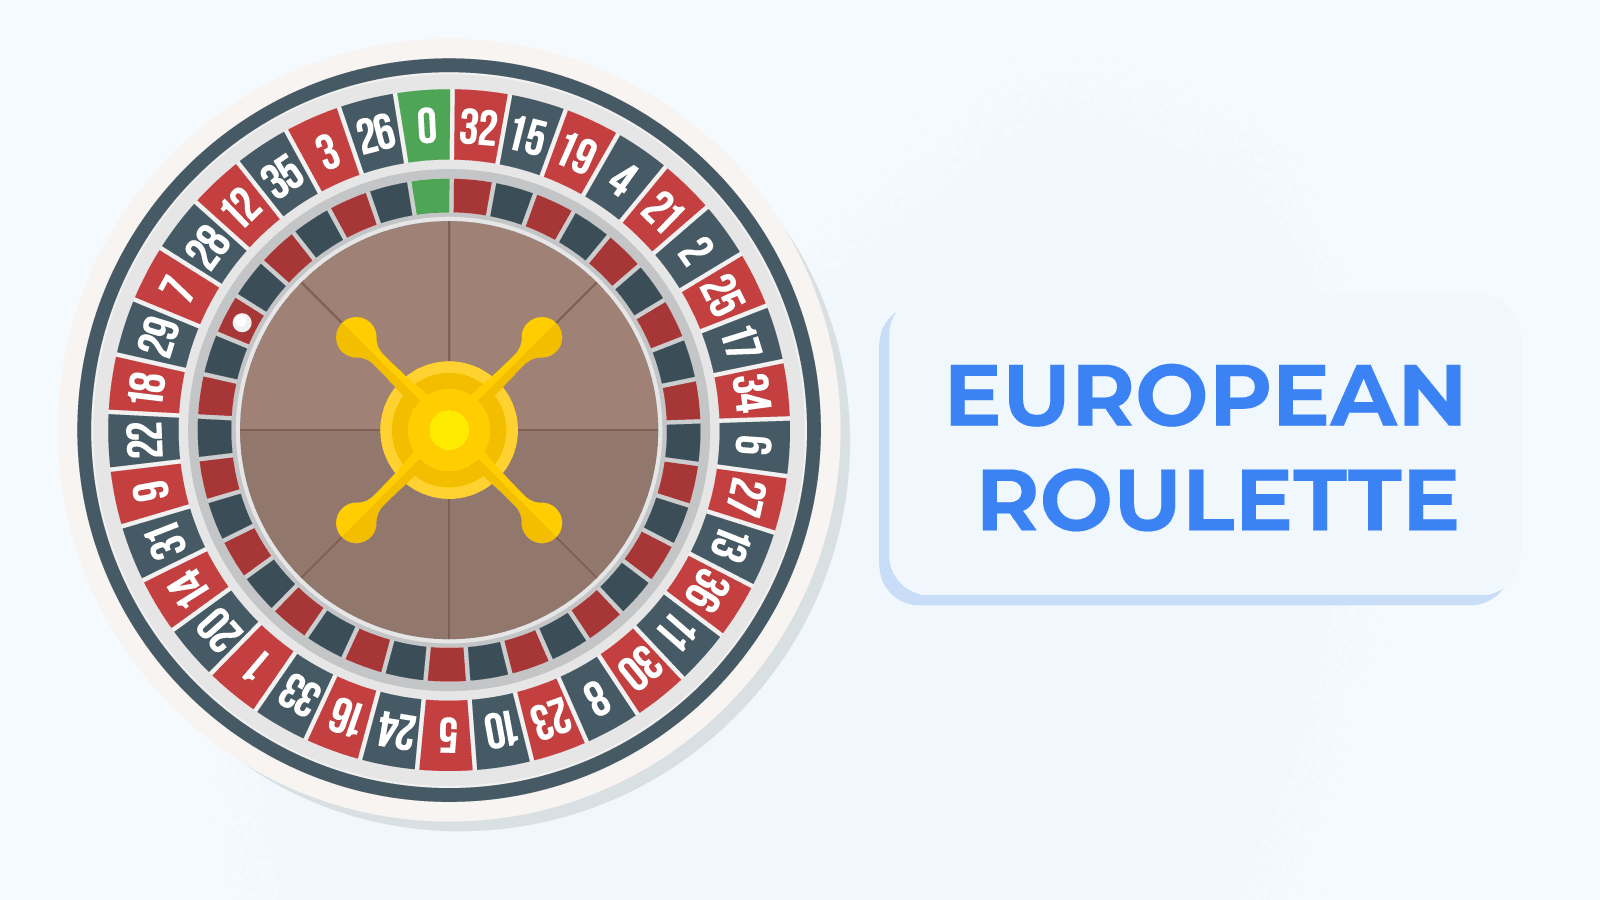 What Type of Roulette Should You Try On in Irish Casinos?